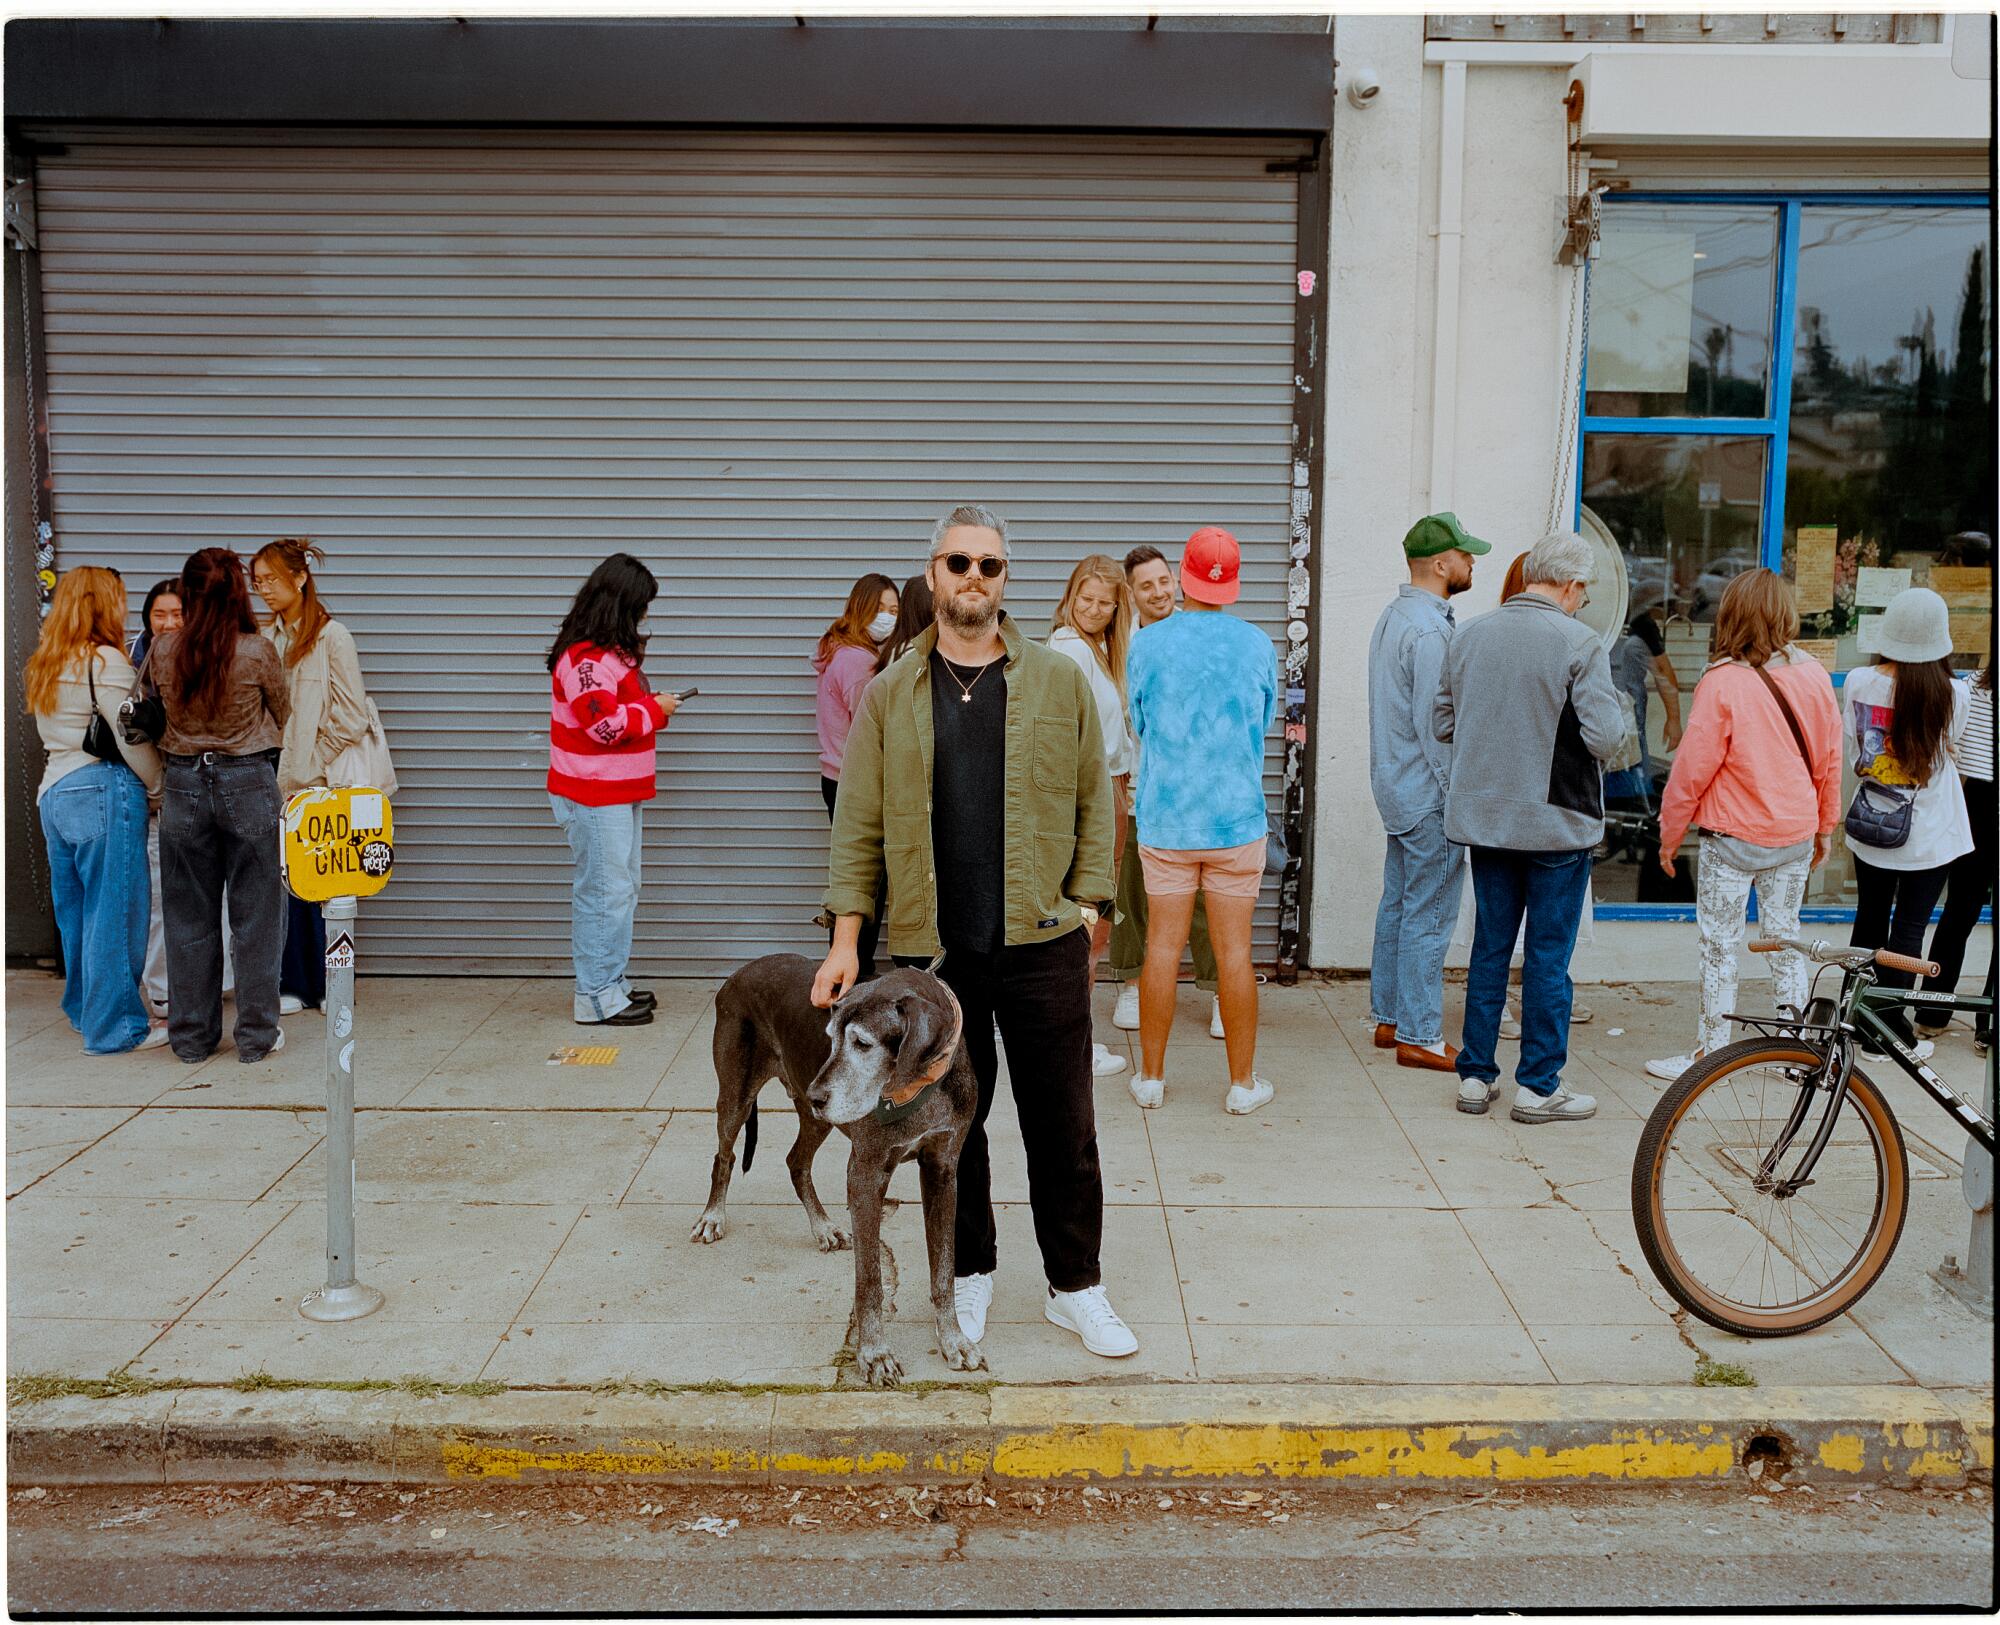 Man in a green jacket stands with his dog on the sidewalk.